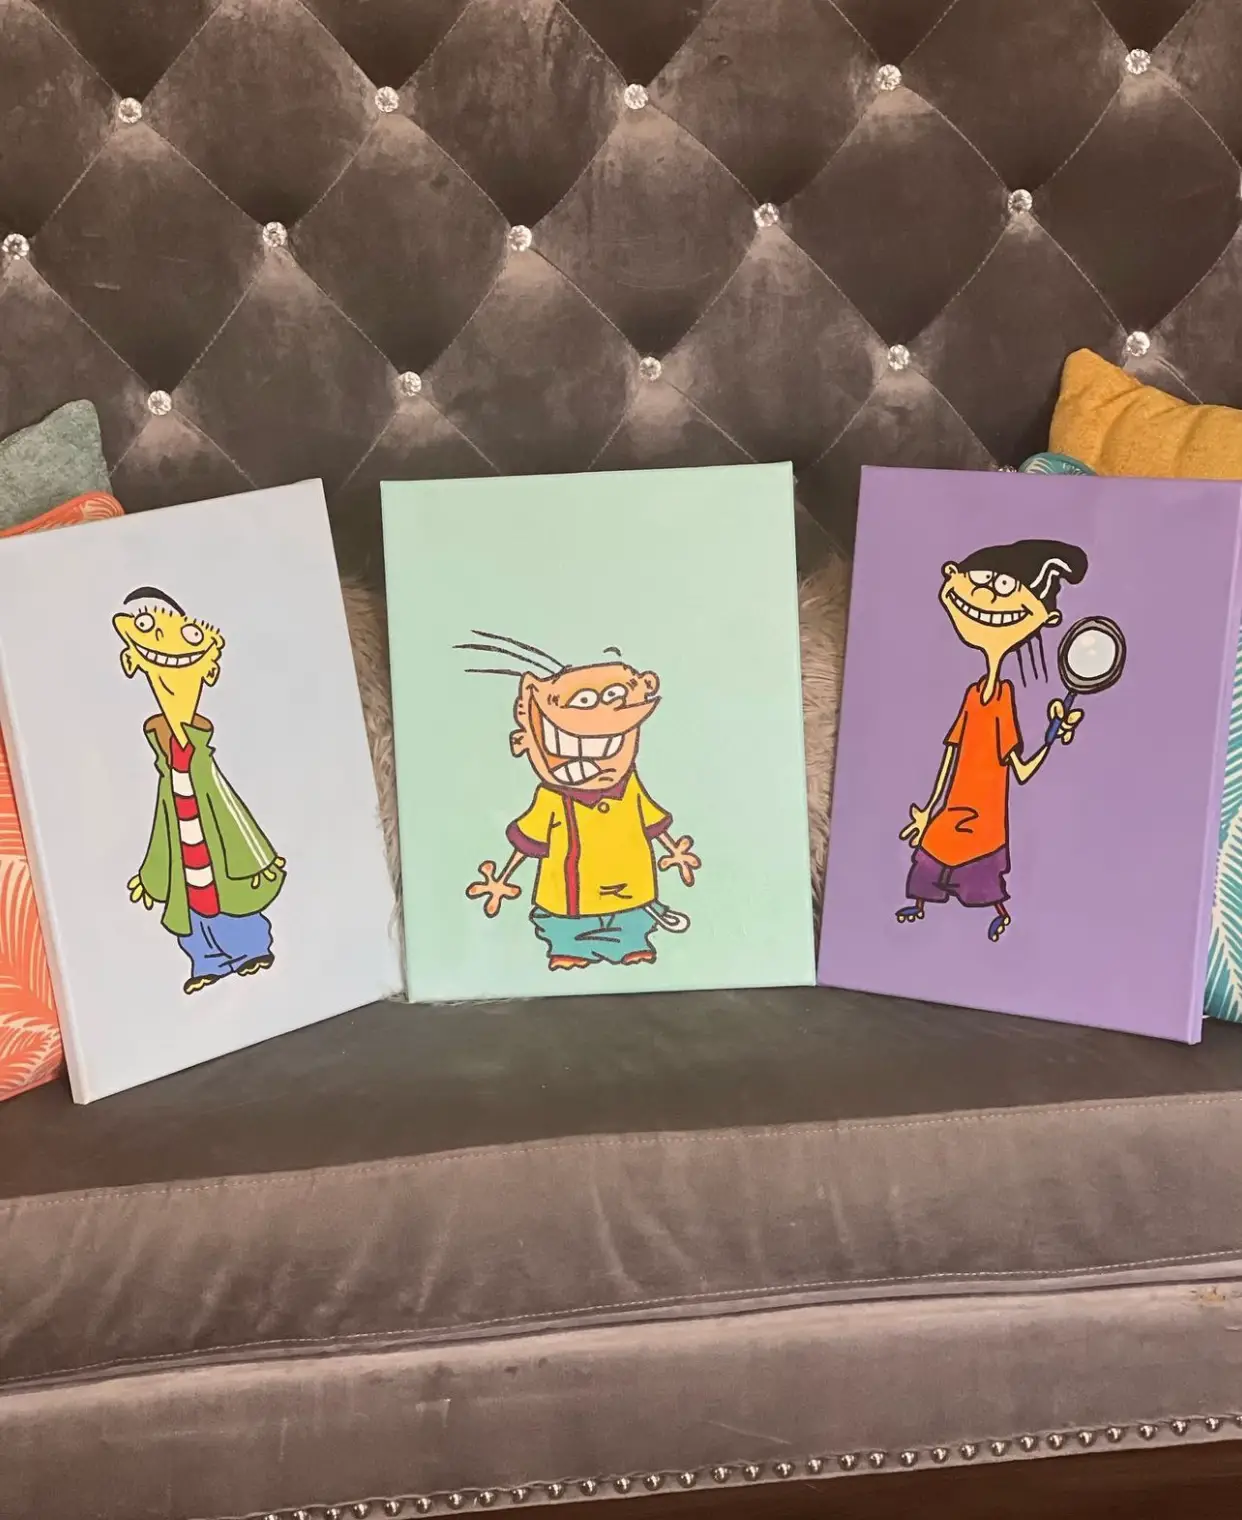 What is underneath Double D's hat in Ed, Edd, and Eddy? - Quora